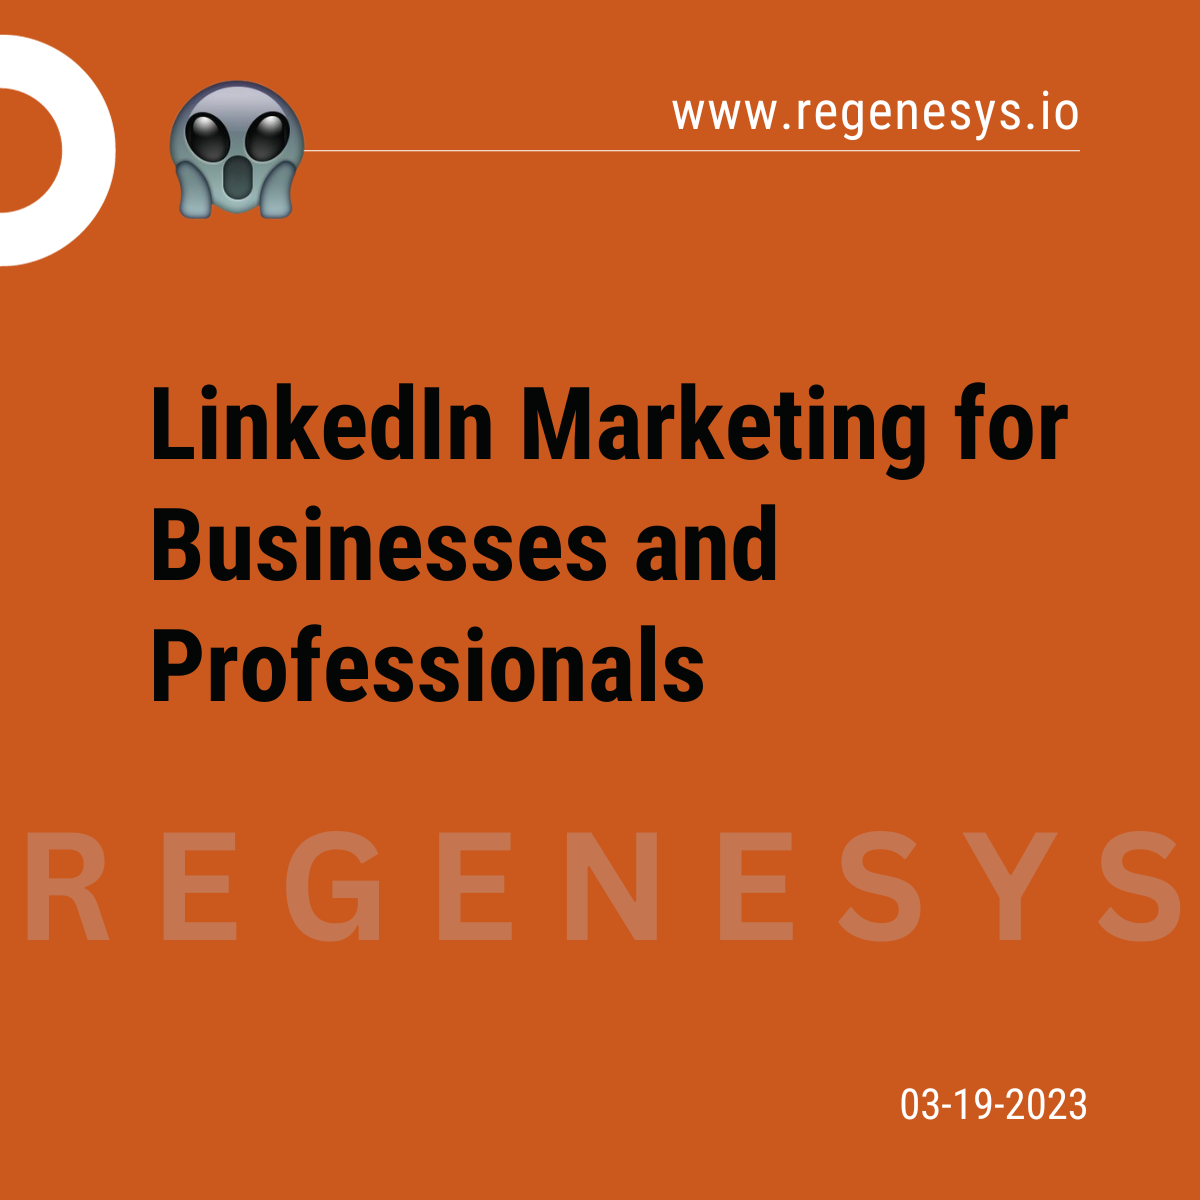 LinkedIn Marketing for Business and Professionals